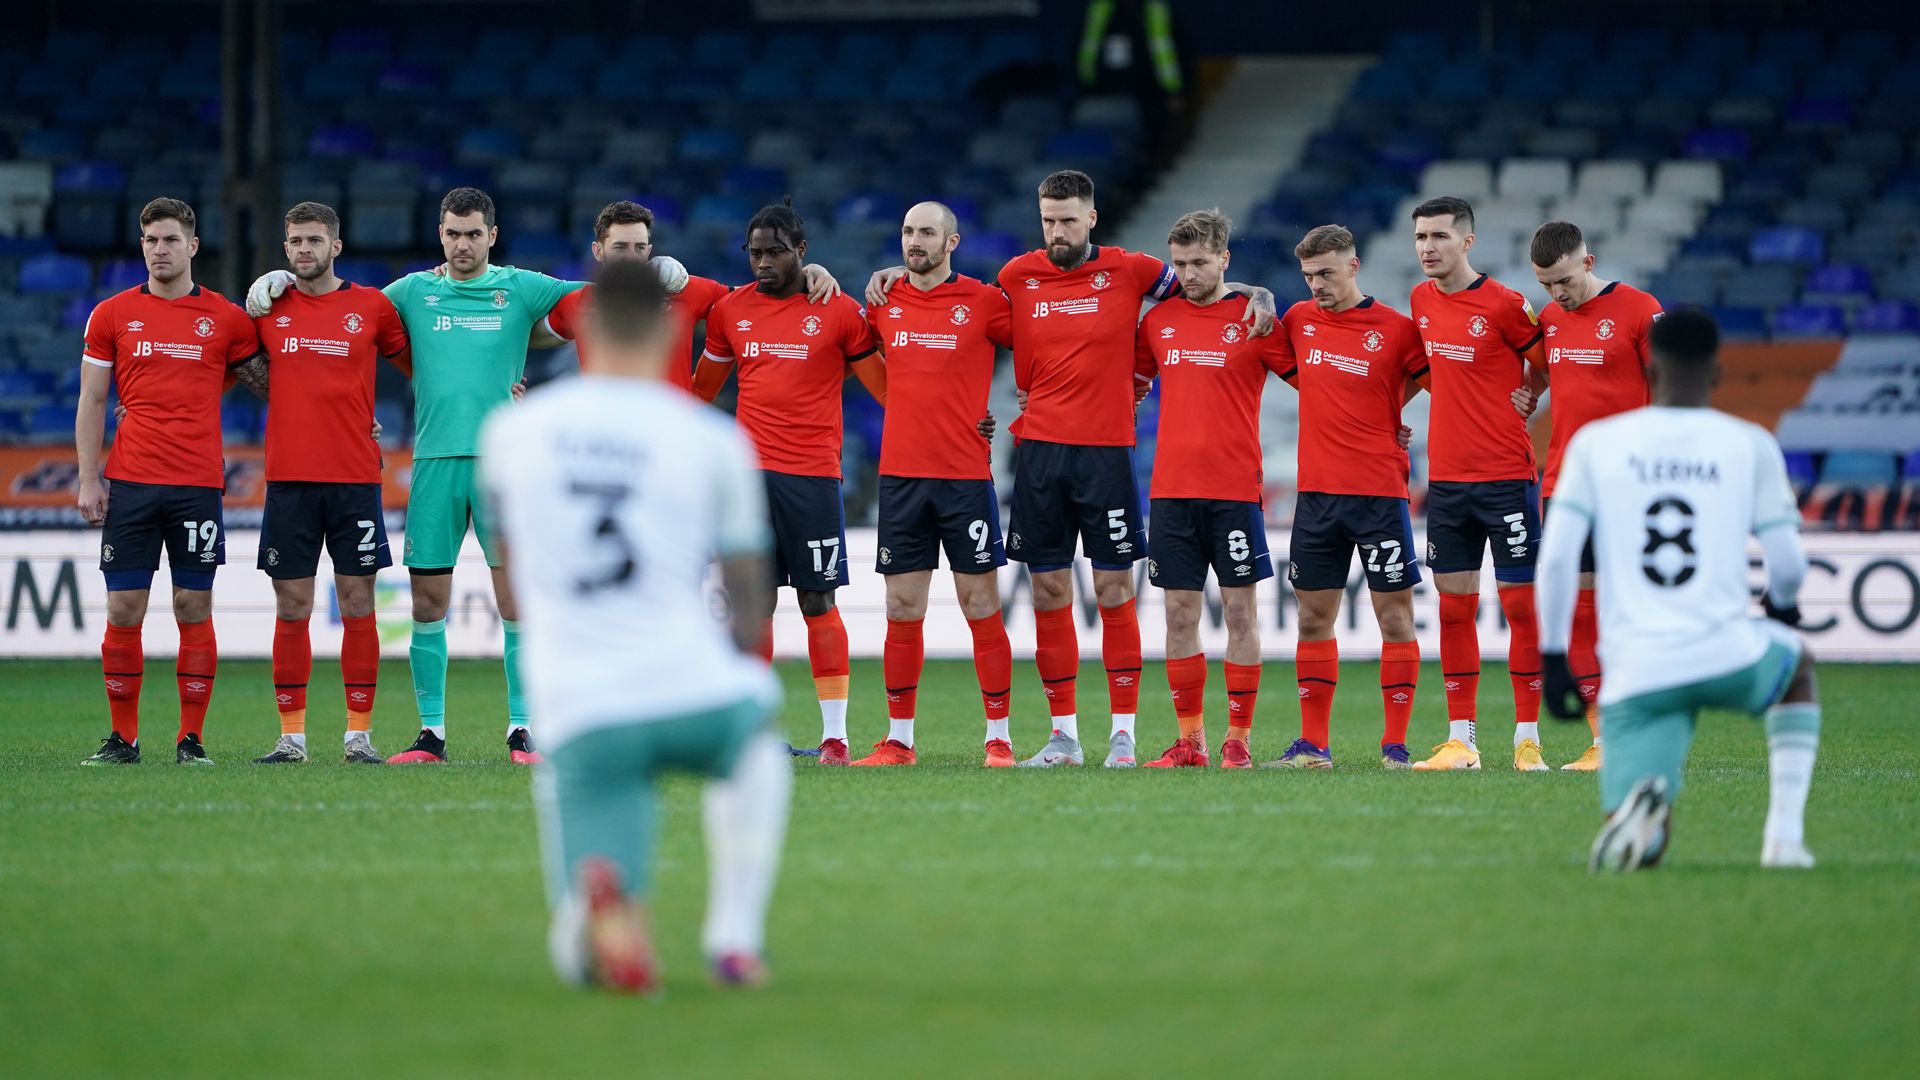 Luton confirm players will not take knee